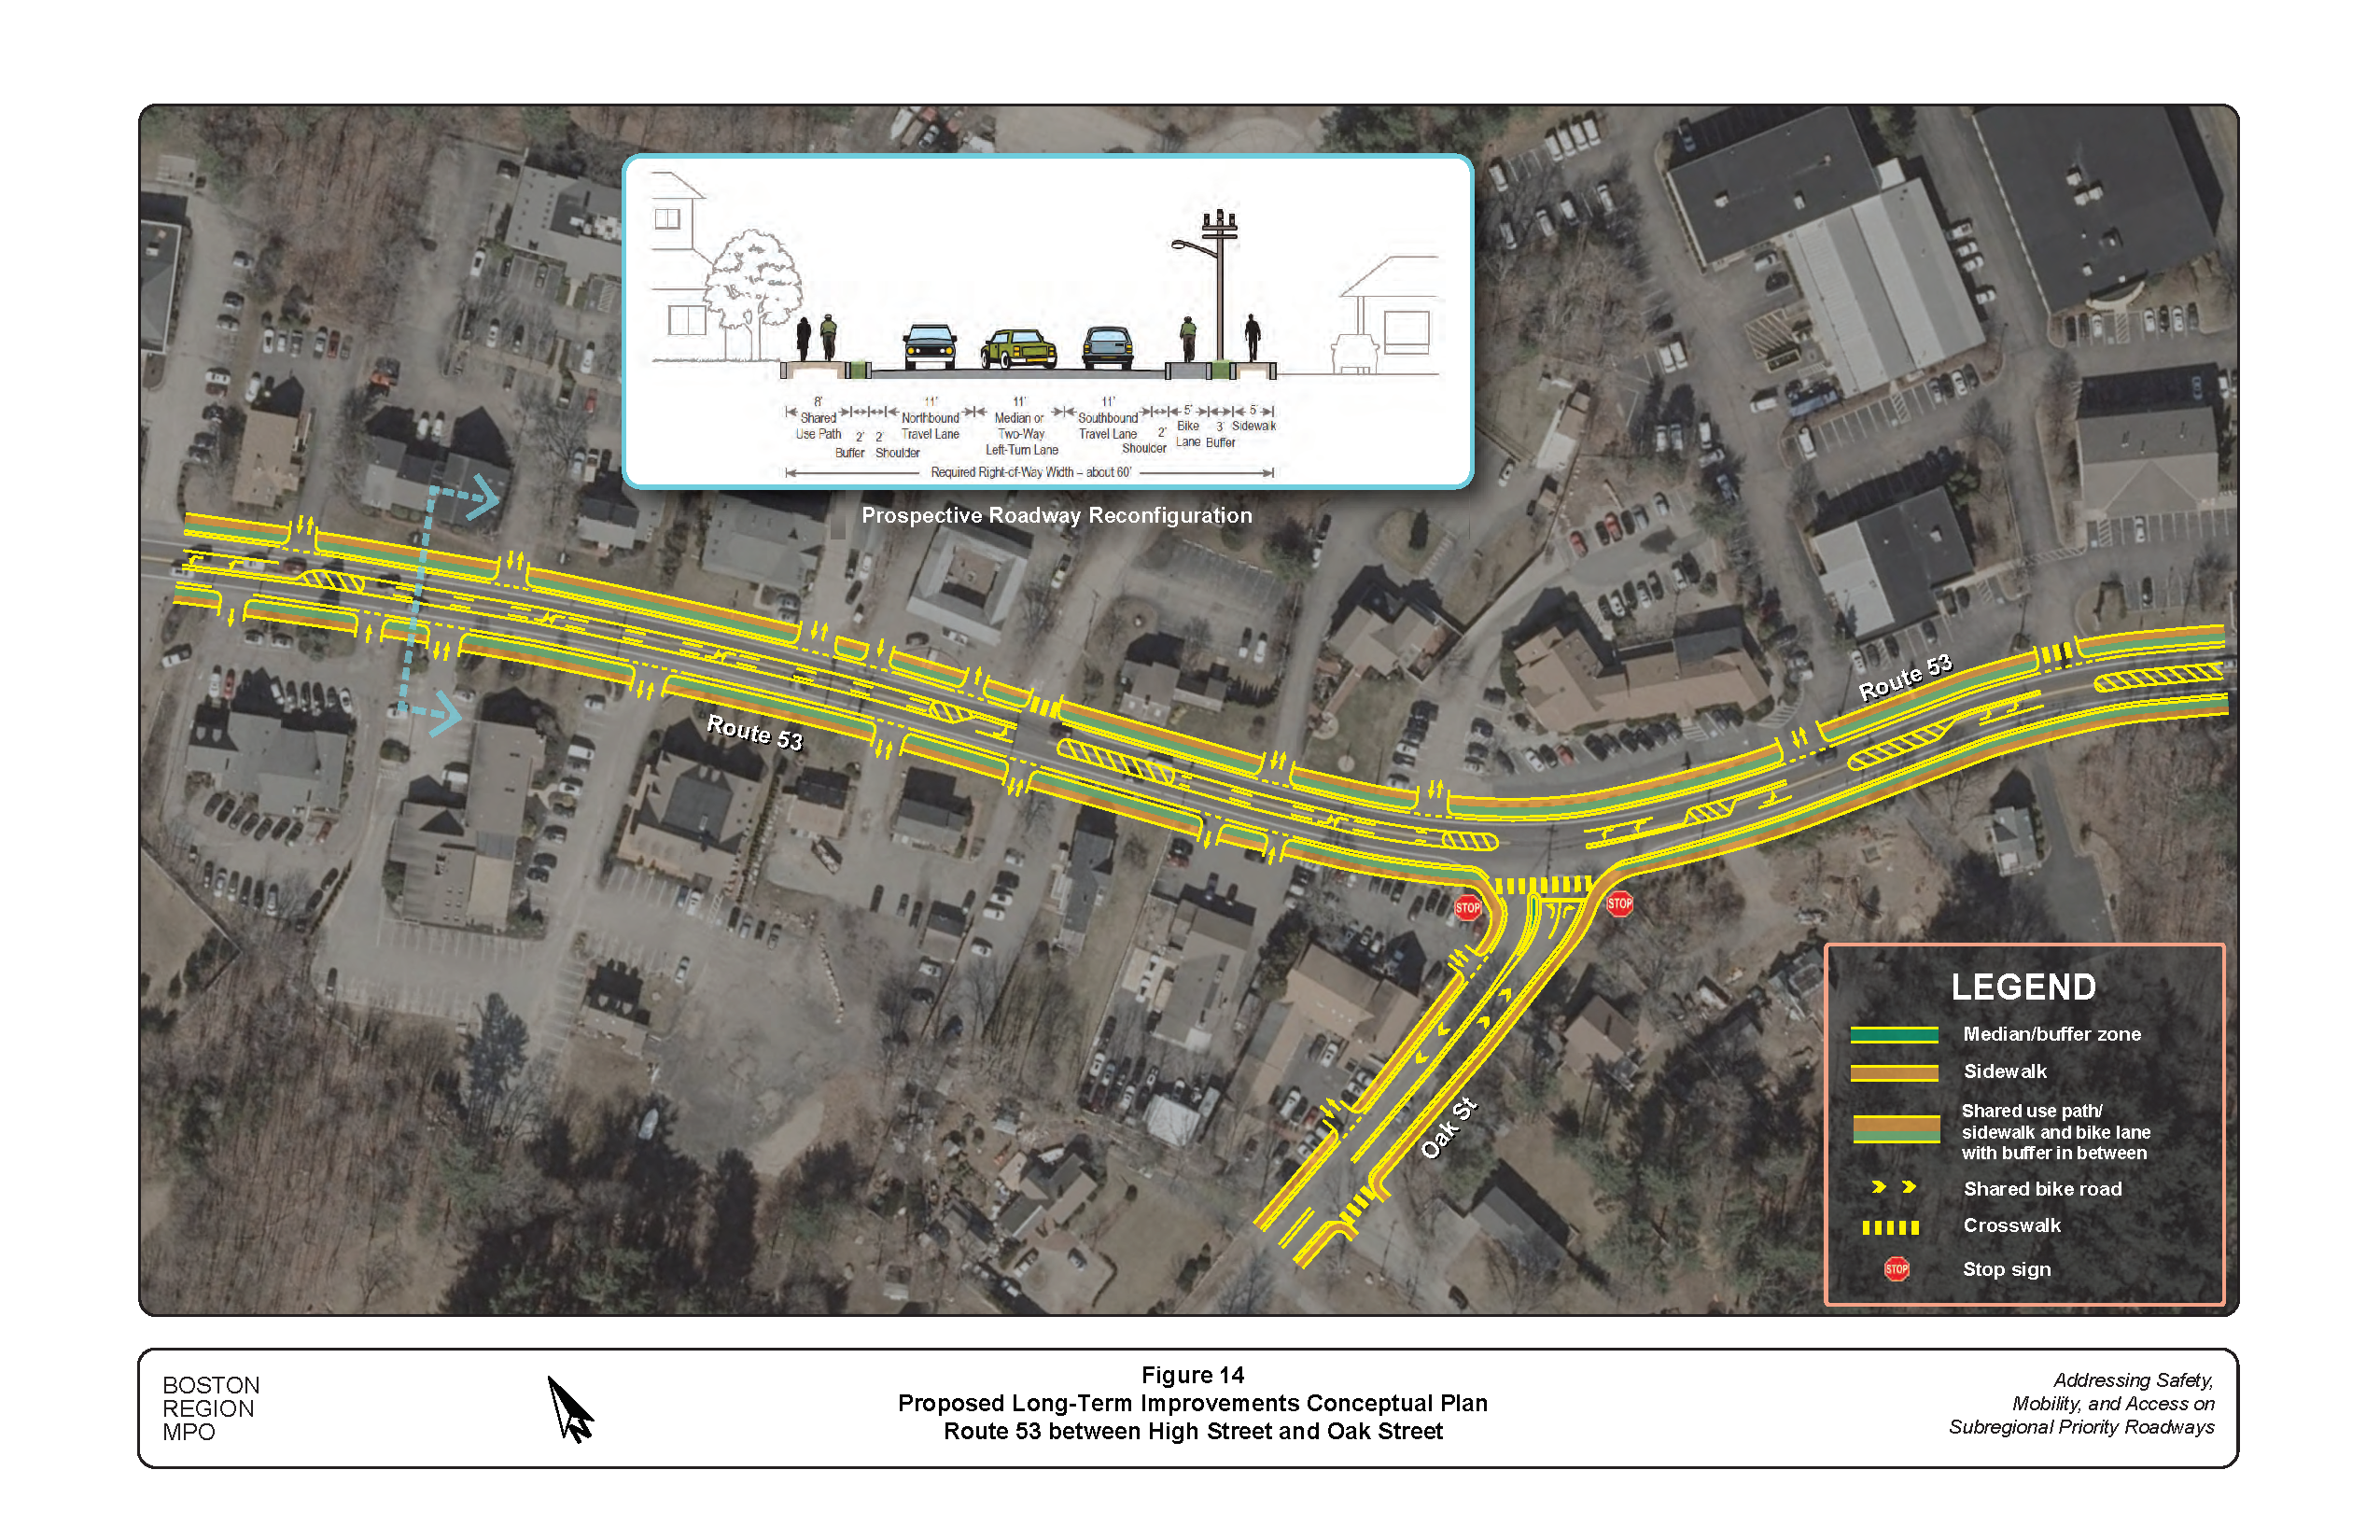 This figure shows a conceptual plan of the proposed long-term improvements in the Route 53 section from High Street to Oak Street.